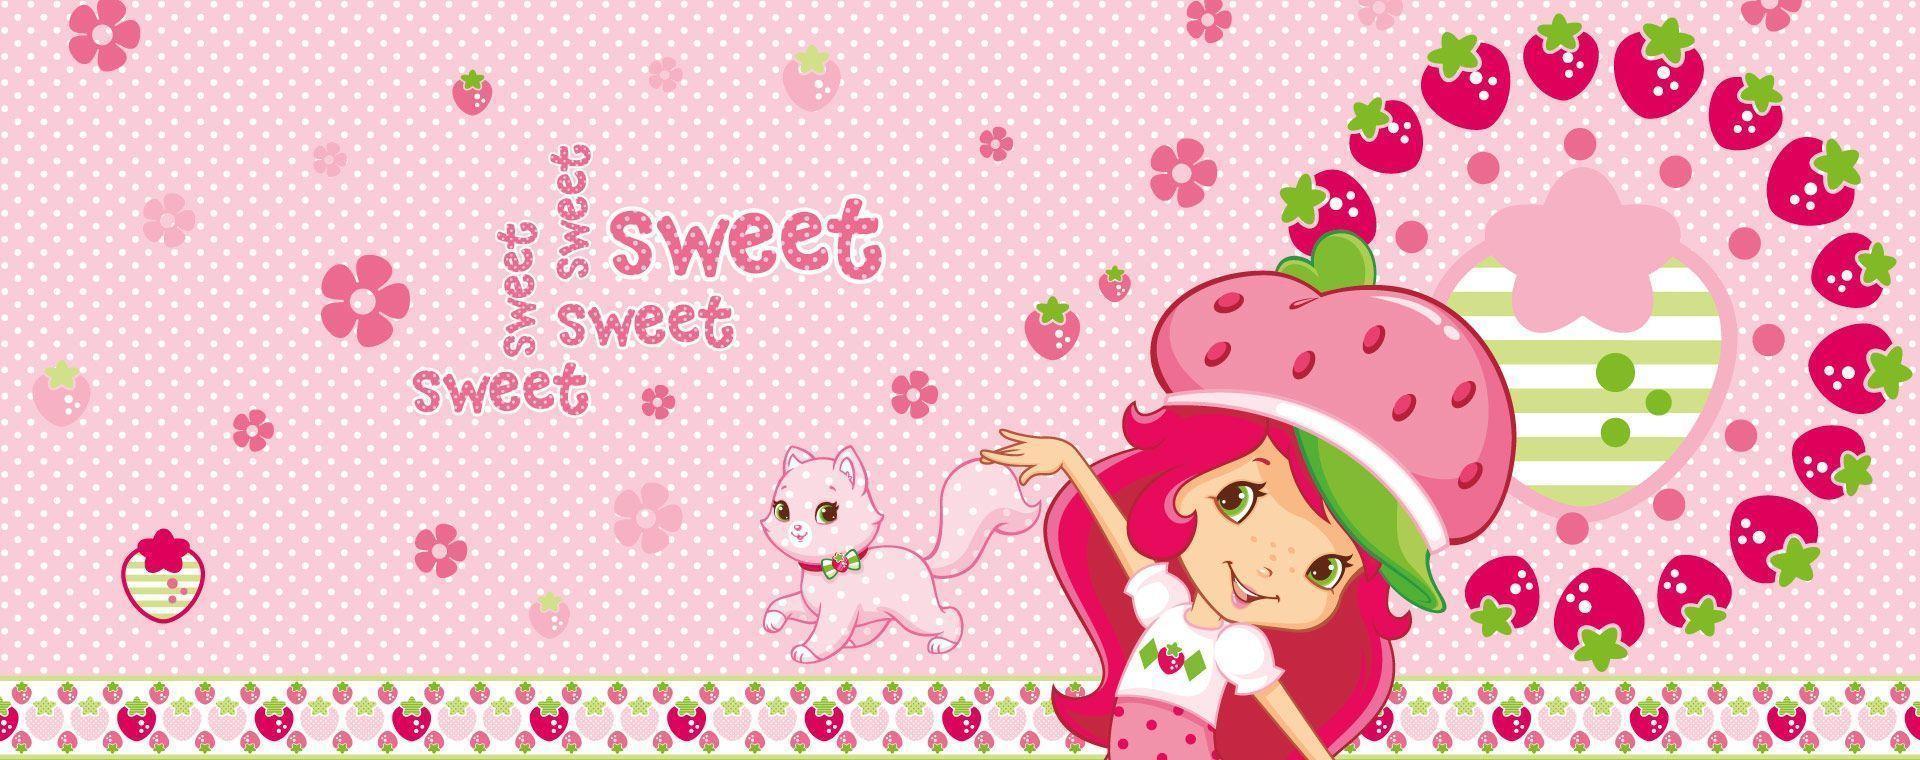 Strawberry Shortcake Backgrounds - Wallpaper Cave